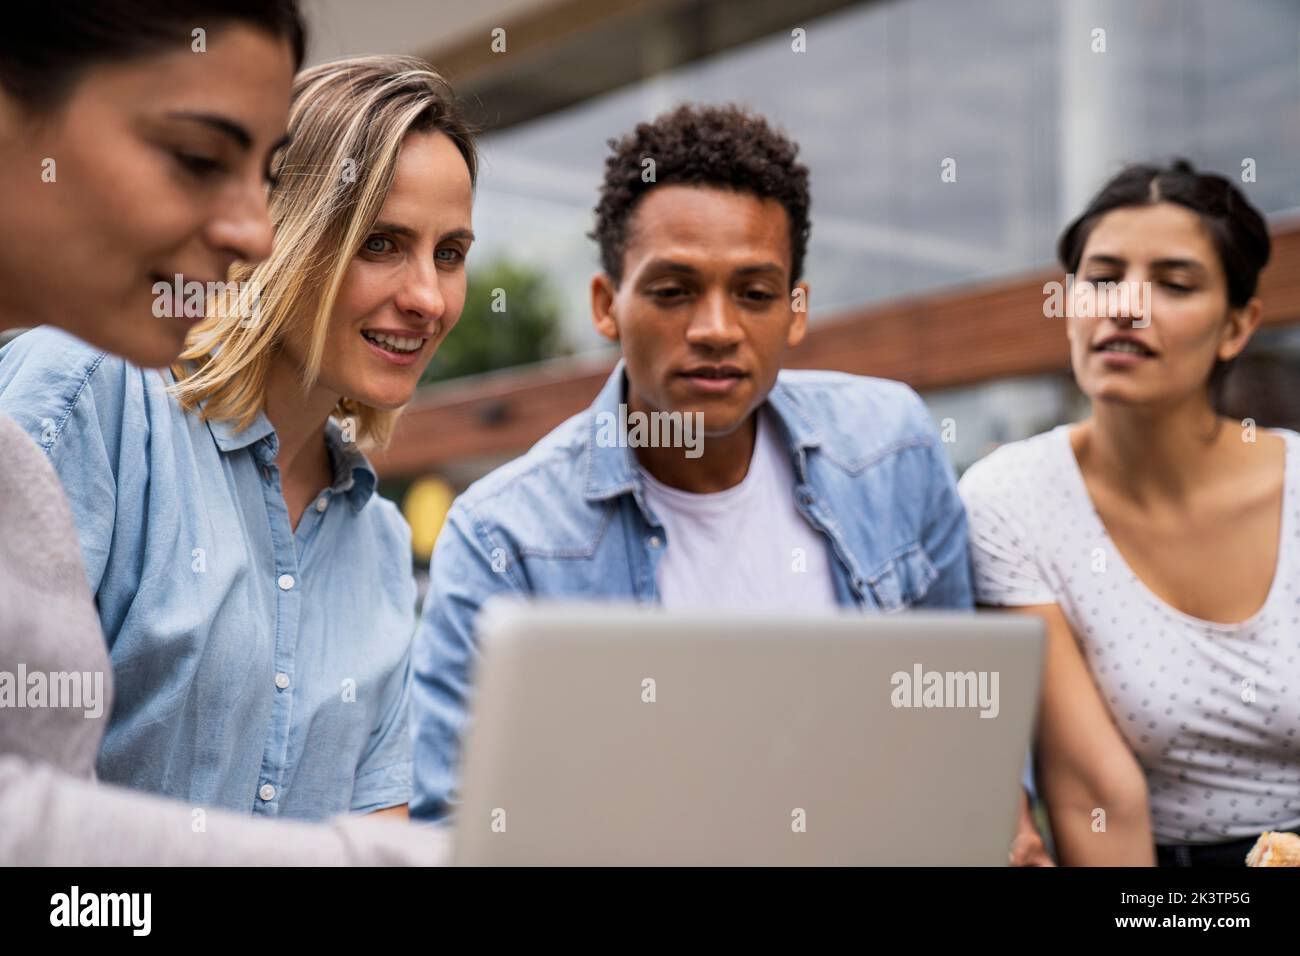 Diverse group of freelance contractor looking at a laptop's screen in an outdoors setting Stock Photo